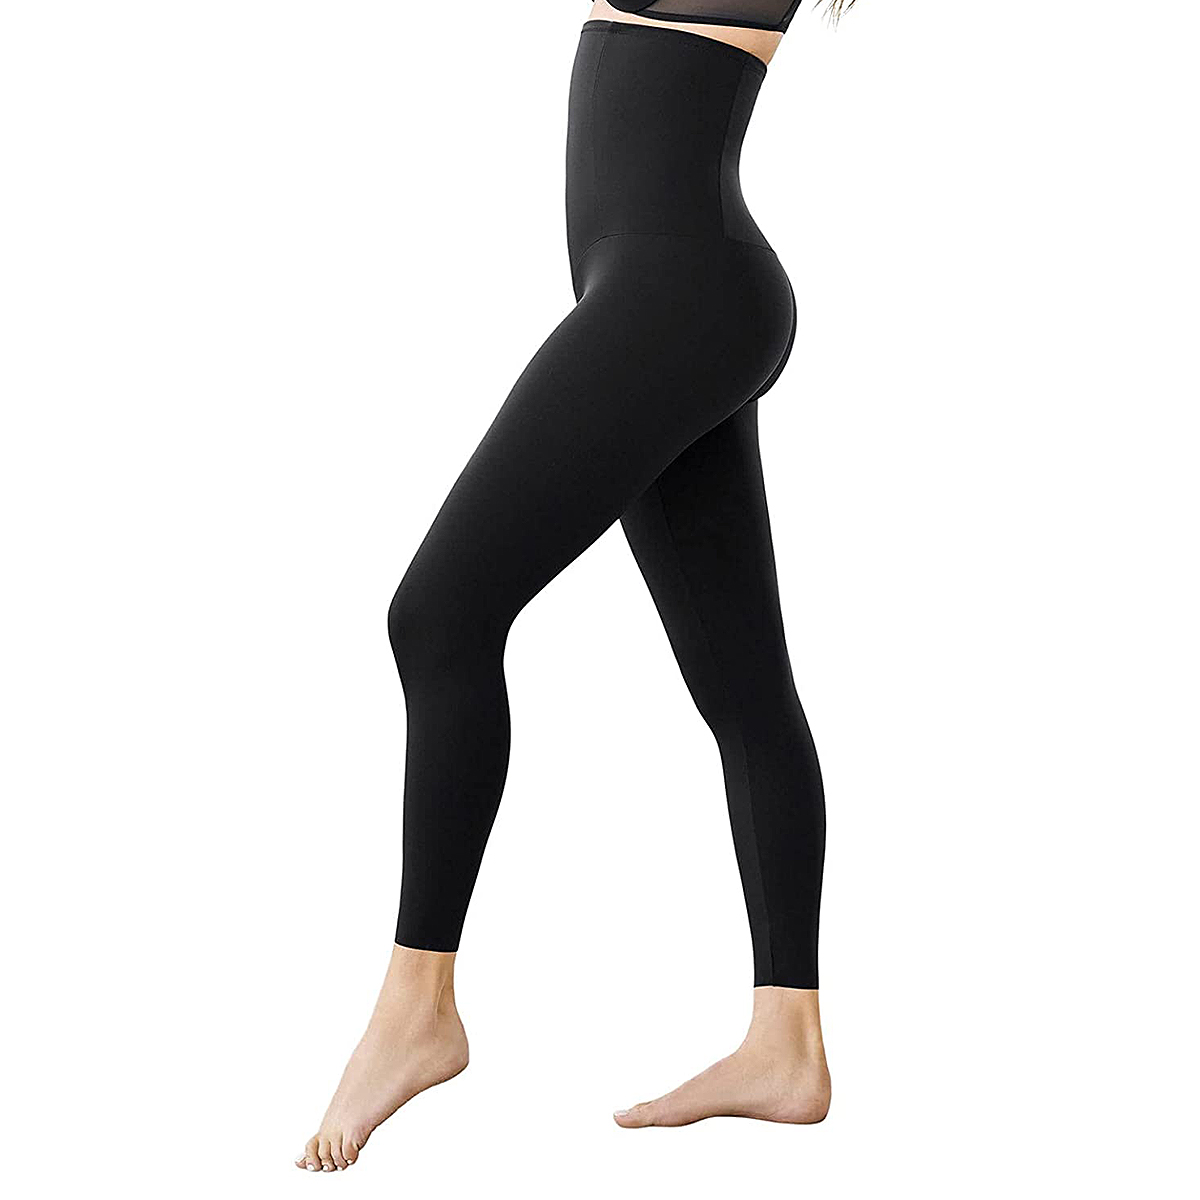 145 GOLD infused leggings that promise to tackle cellulite | Daily Mail  Online